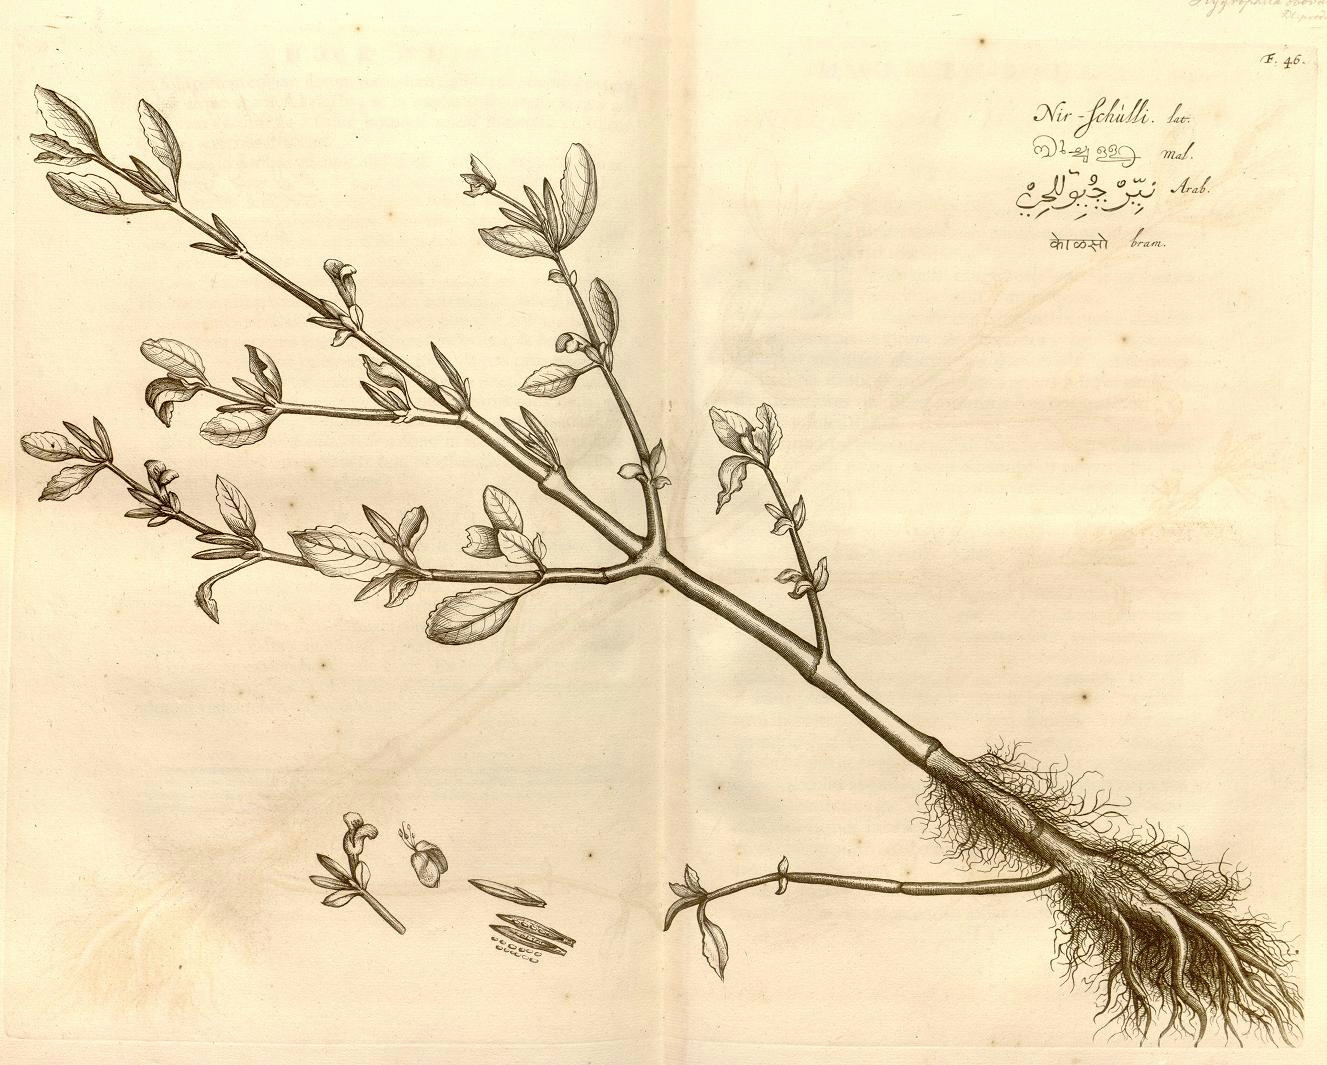 An engraving of the ginger plant from a 17th century book on medical plants.